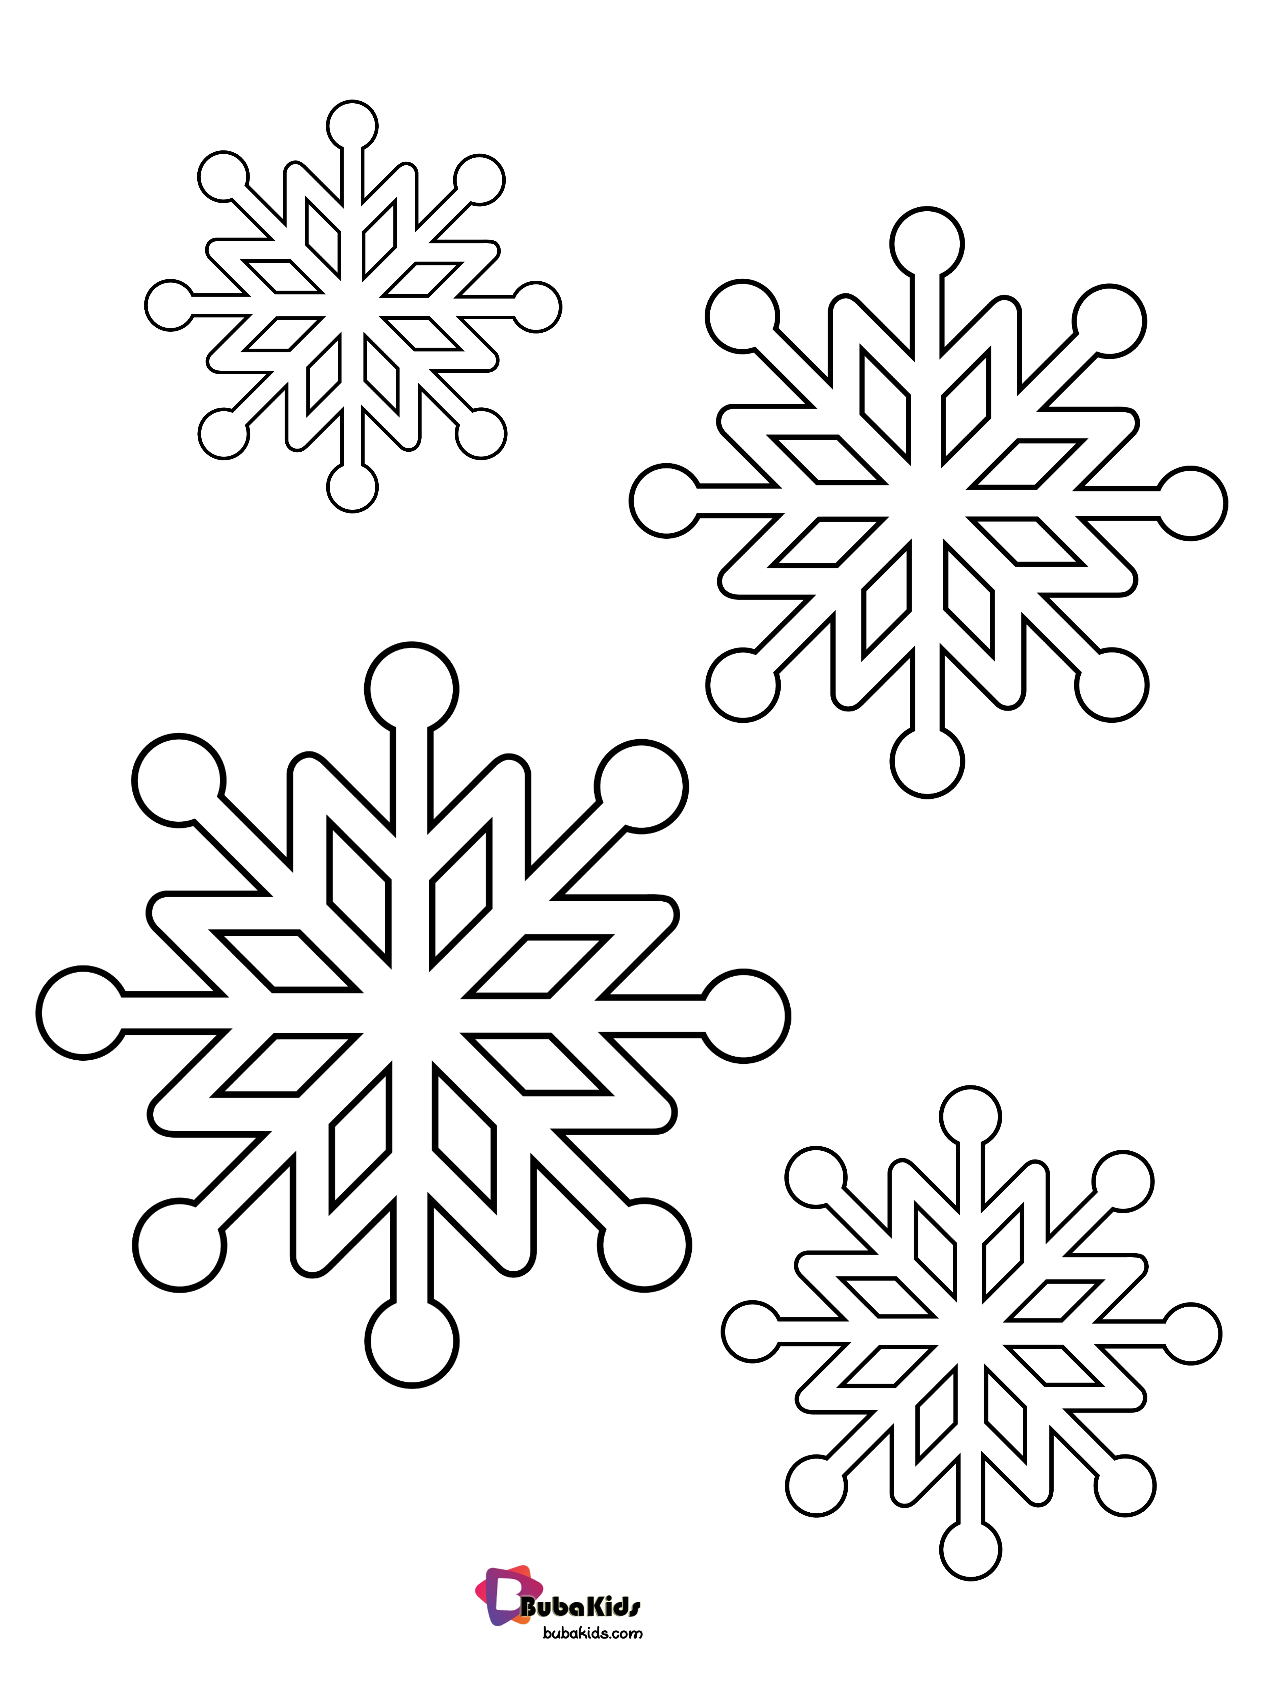 Simple and easy winter snowflake coloring page. Wallpaper